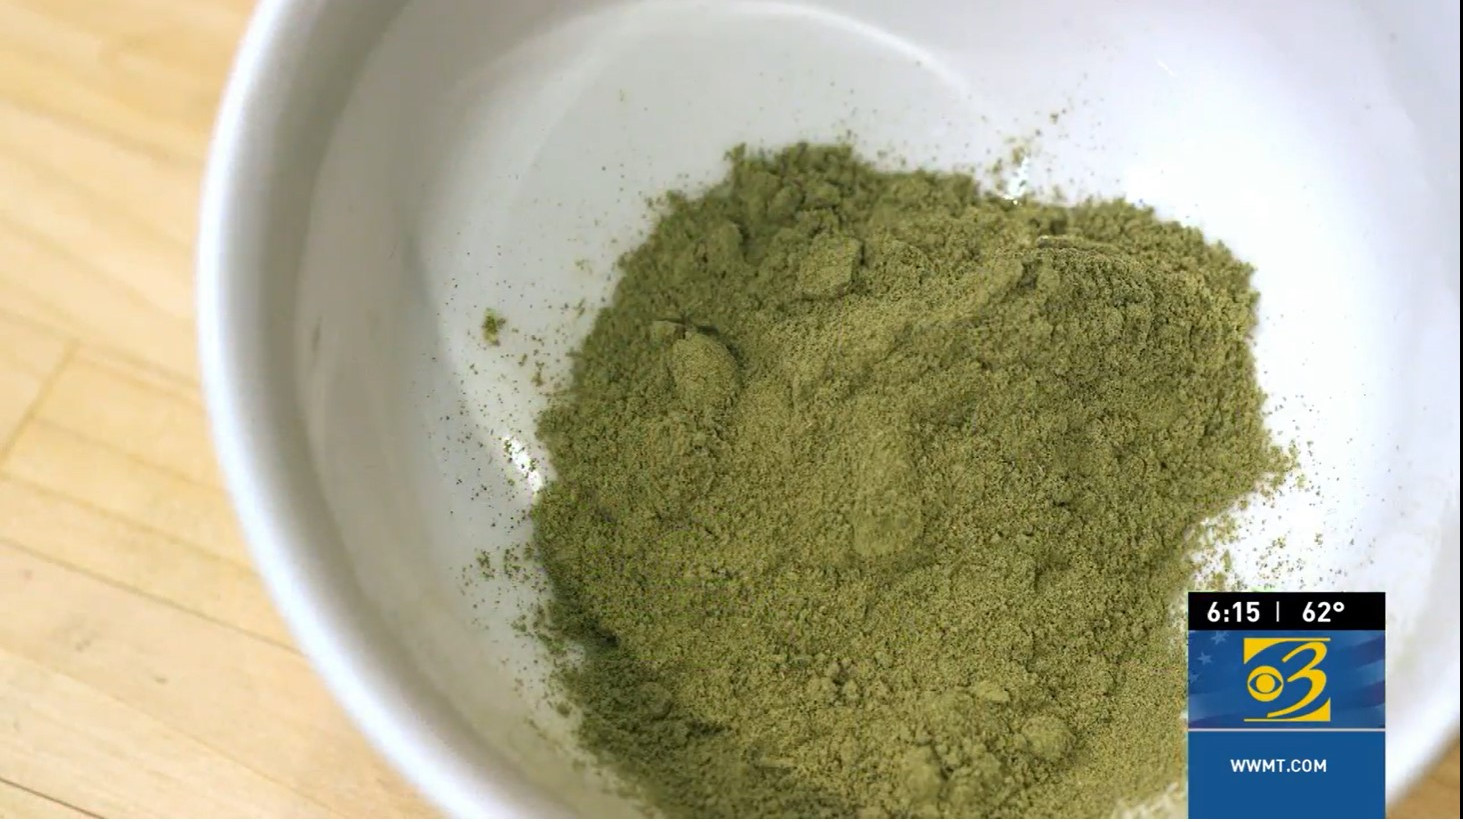 Kratom and Consumer Rights: The Importance of Transparency and Accountability